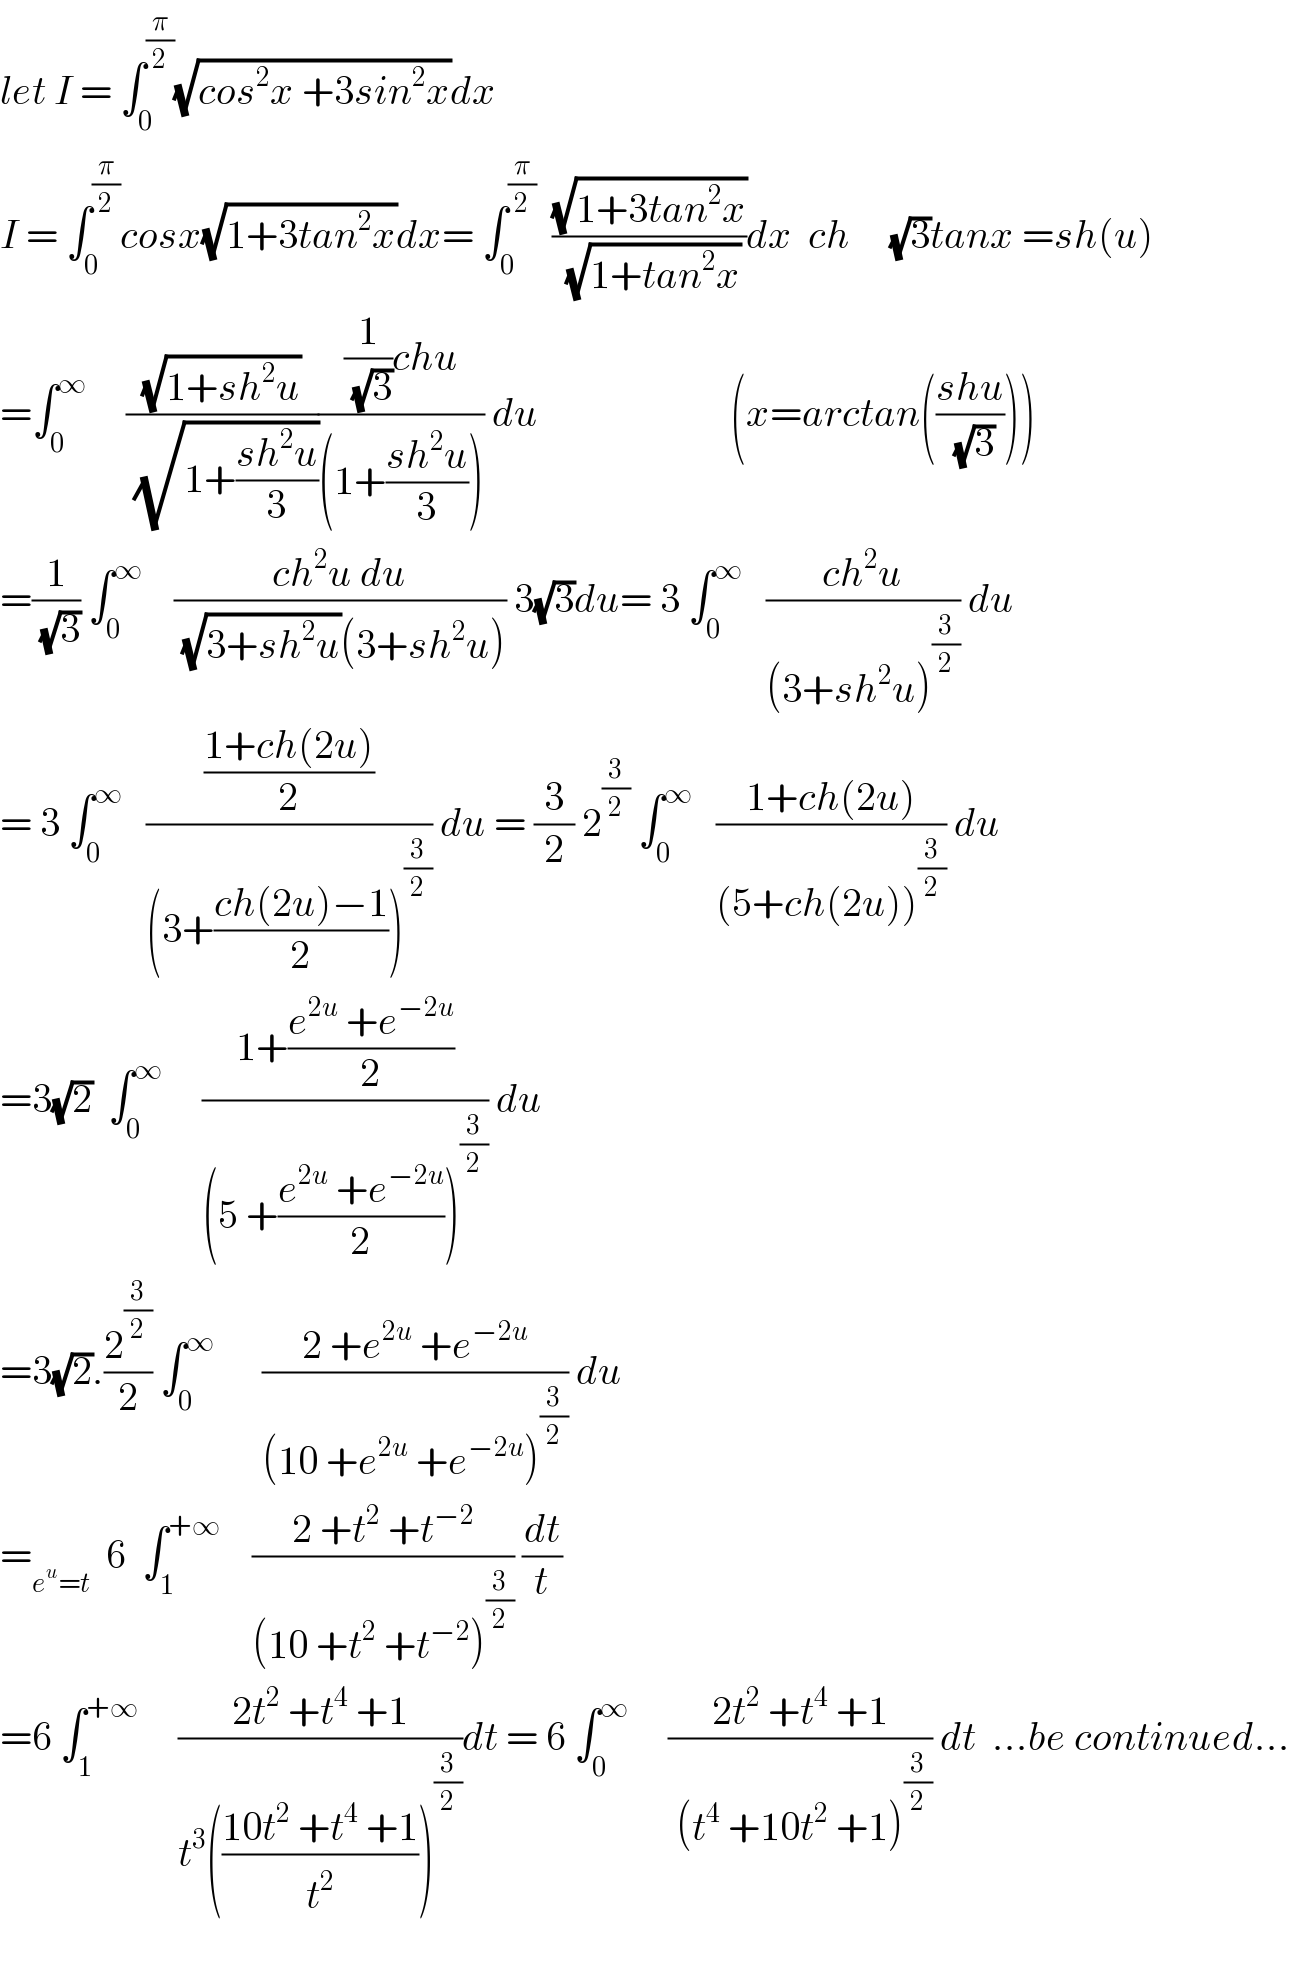 let I = ∫_0 ^(π/2) (√(cos^2 x +3sin^2 x))dx  I = ∫_0 ^(π/2) cosx(√(1+3tan^2 x))dx= ∫_0 ^(π/2)   ((√(1+3tan^2 x))/(√(1+tan^2 x)))dx  ch     (√3)tanx =sh(u)  =∫_0 ^∞      ((√(1+sh^2 u))/(√(1+((sh^2 u)/3))))(((1/(√3))chu)/((1+((sh^2 u)/3)))) du                        (x=arctan(((shu)/(√3))))  =(1/(√3)) ∫_0 ^∞     ((ch^2 u du)/((√(3+sh^2 u))(3+sh^2 u))) 3(√3)du= 3 ∫_0 ^∞    ((ch^2 u)/((3+sh^2 u)^(3/2) )) du  = 3 ∫_0 ^∞    (((1+ch(2u))/2)/((3+((ch(2u)−1)/2))^(3/2) )) du = (3/2) 2^(3/2)  ∫_0 ^∞    ((1+ch(2u))/((5+ch(2u))^(3/2) )) du  =3(√2)  ∫_0 ^∞      ((1+((e^(2u)  +e^(−2u) )/2))/((5 +((e^(2u)  +e^(−2u) )/2))^(3/2) )) du  =3(√2).(2^(3/2) /2) ∫_0 ^∞       ((2 +e^(2u)  +e^(−2u) )/((10 +e^(2u)  +e^(−2u) )^(3/2) )) du  =_(e^u =t)   6  ∫_1 ^(+∞)     ((2 +t^2  +t^(−2) )/((10 +t^2  +t^(−2) )^(3/2) )) (dt/t)  =6 ∫_1 ^(+∞)      ((2t^2  +t^4  +1)/(t^3 (((10t^2  +t^4  +1)/t^2 ))^(3/2) ))dt = 6 ∫_0 ^∞      ((2t^2  +t^4  +1)/( (t^4  +10t^2  +1)^(3/2) )) dt  ...be continued...    